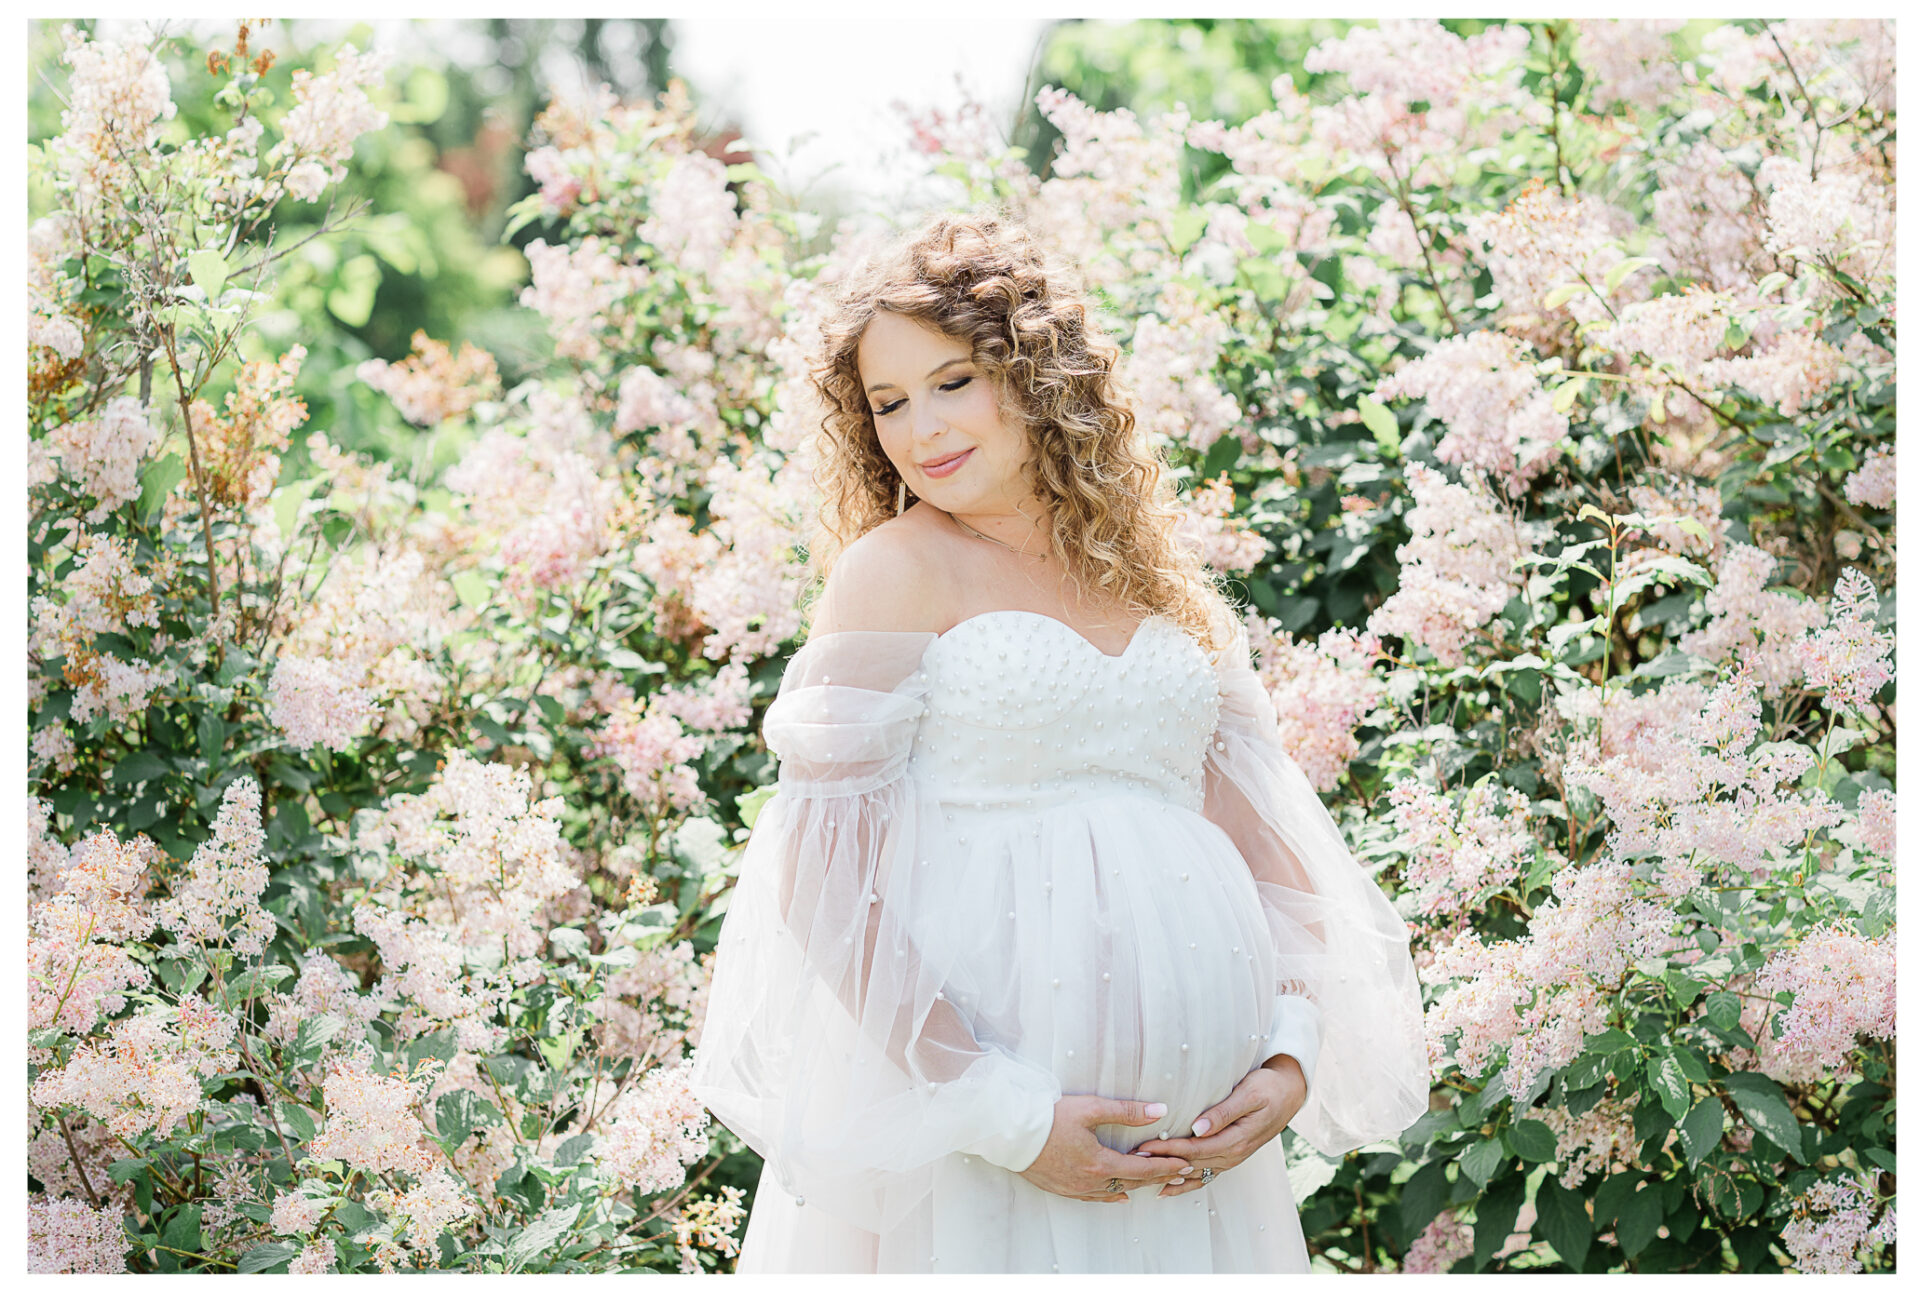 Winter Freire Photography | woman wearing a beautiful white gown during her outdoor summertime maternity session surrounded by blooming flowers